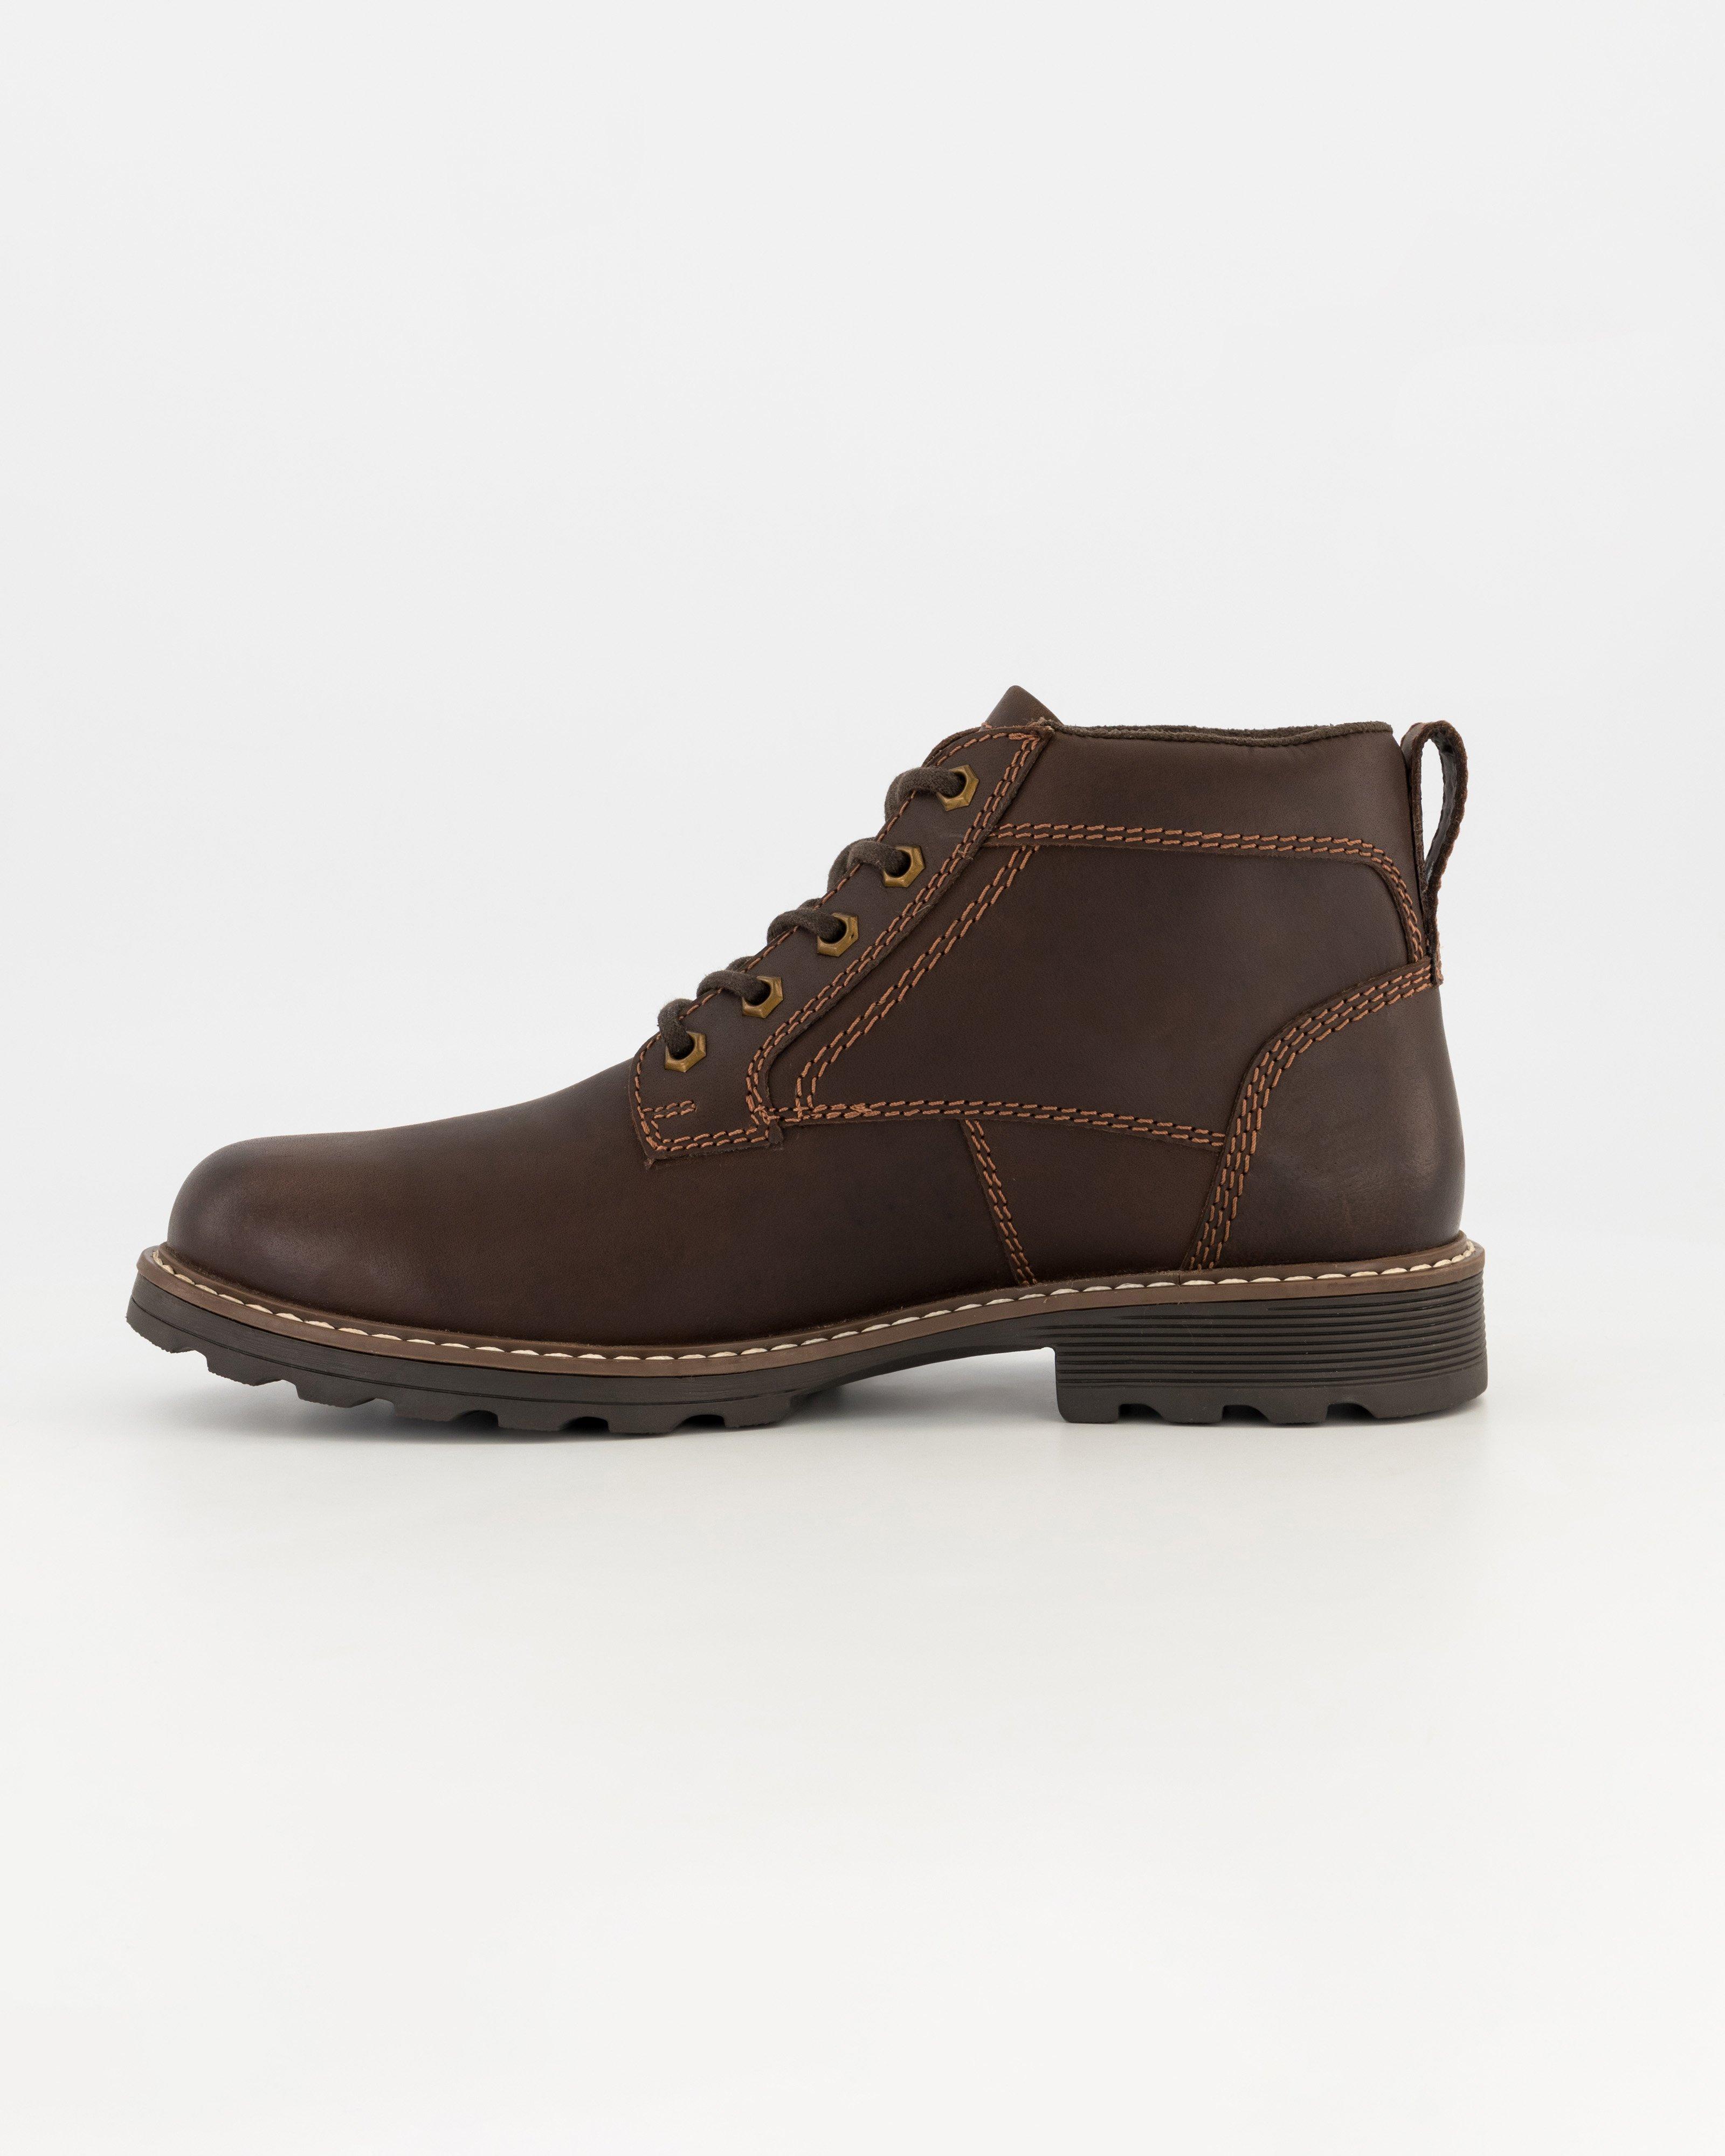 K-Way Elements Men’s Smith Boots -  Chocolate